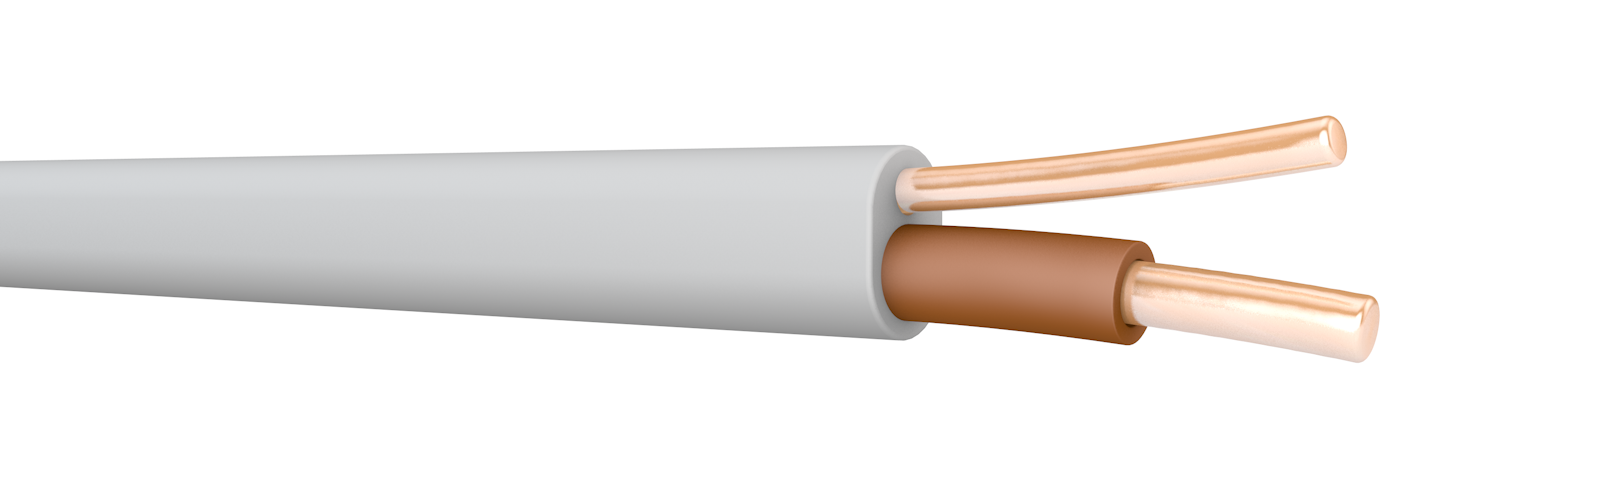 PVC cable for lighting and power with single core and bare CPC.